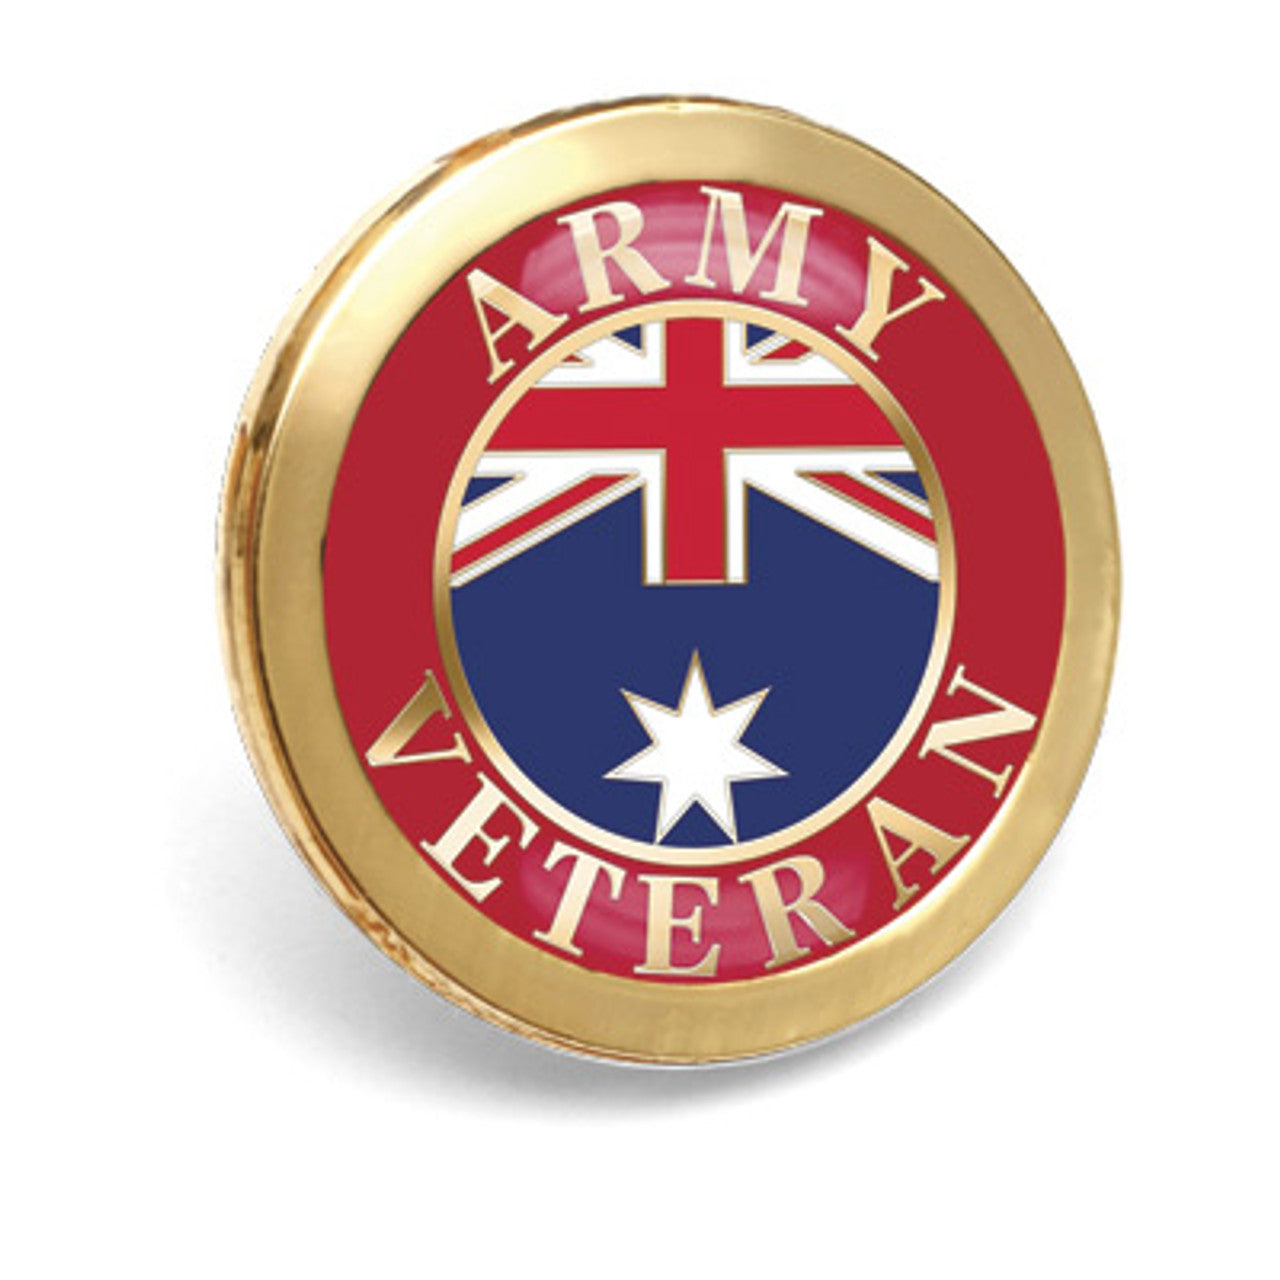 Showcase your dedication and commitment with this beautifully crafted enamel over metal veterans' badge. Embodying the spirit of the Australian Army, this tasteful pin is suitable for wear on any occasion. Measuring 20mm, this eye-catching pin is securely fastened with a durable butterfly pin. www.defenceqstore.com.au